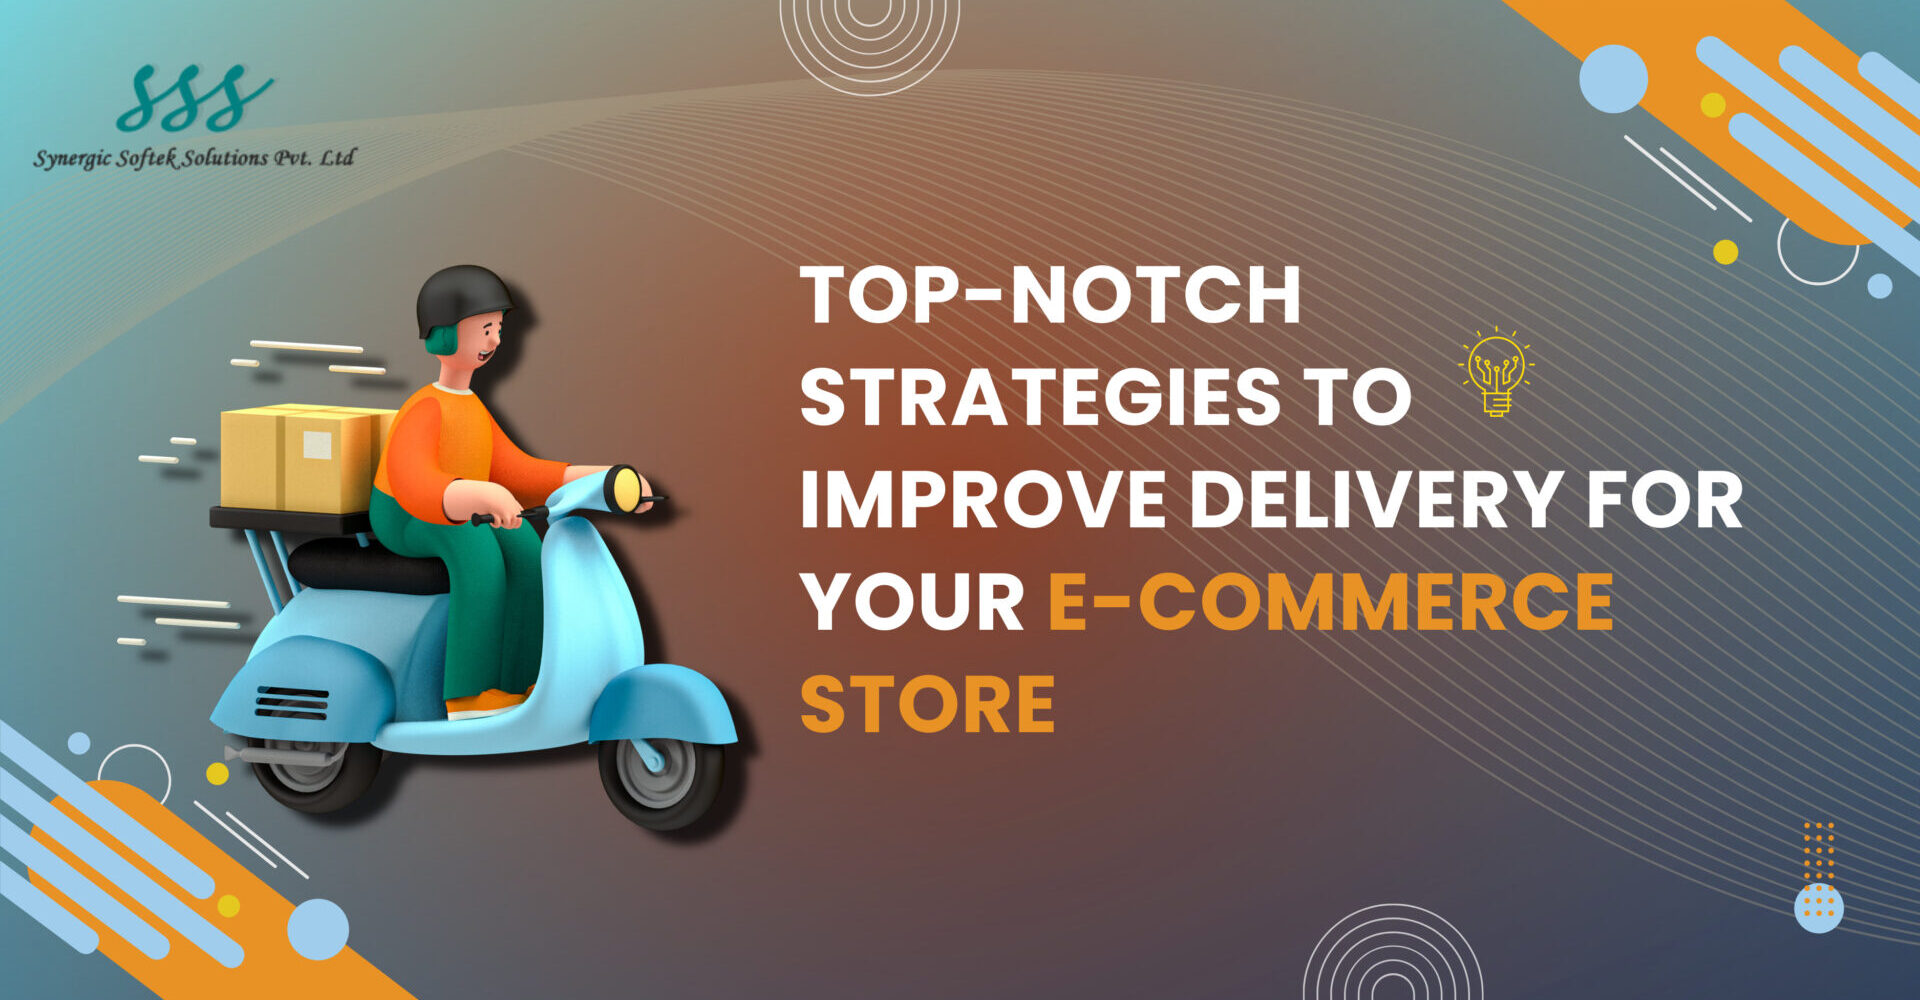 Top-Notch-Strategies-to-Improve-Delivery-for-Your-E-commerce-Store